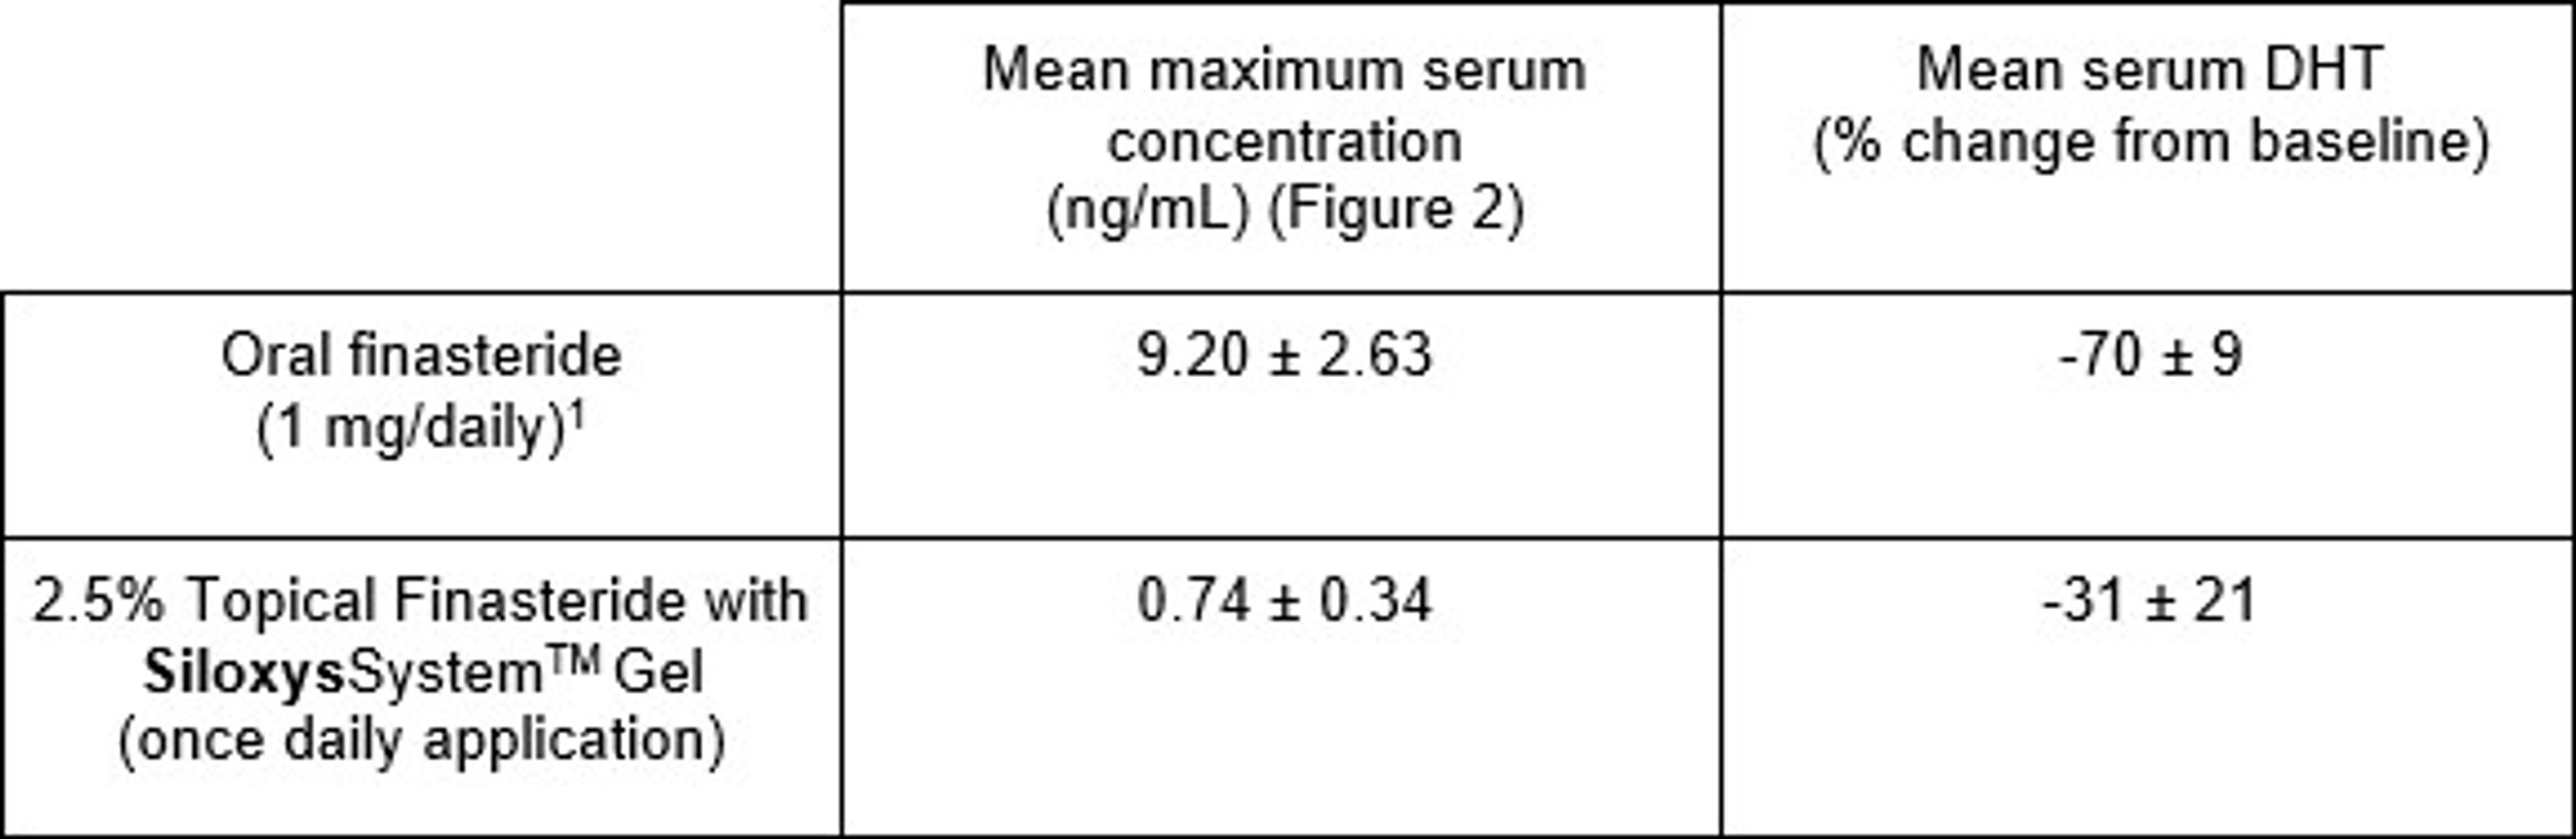 Table of data describing differences between maximum finasteride concentration and effect of finasteride on DHT levels between oral and topical finasteride.